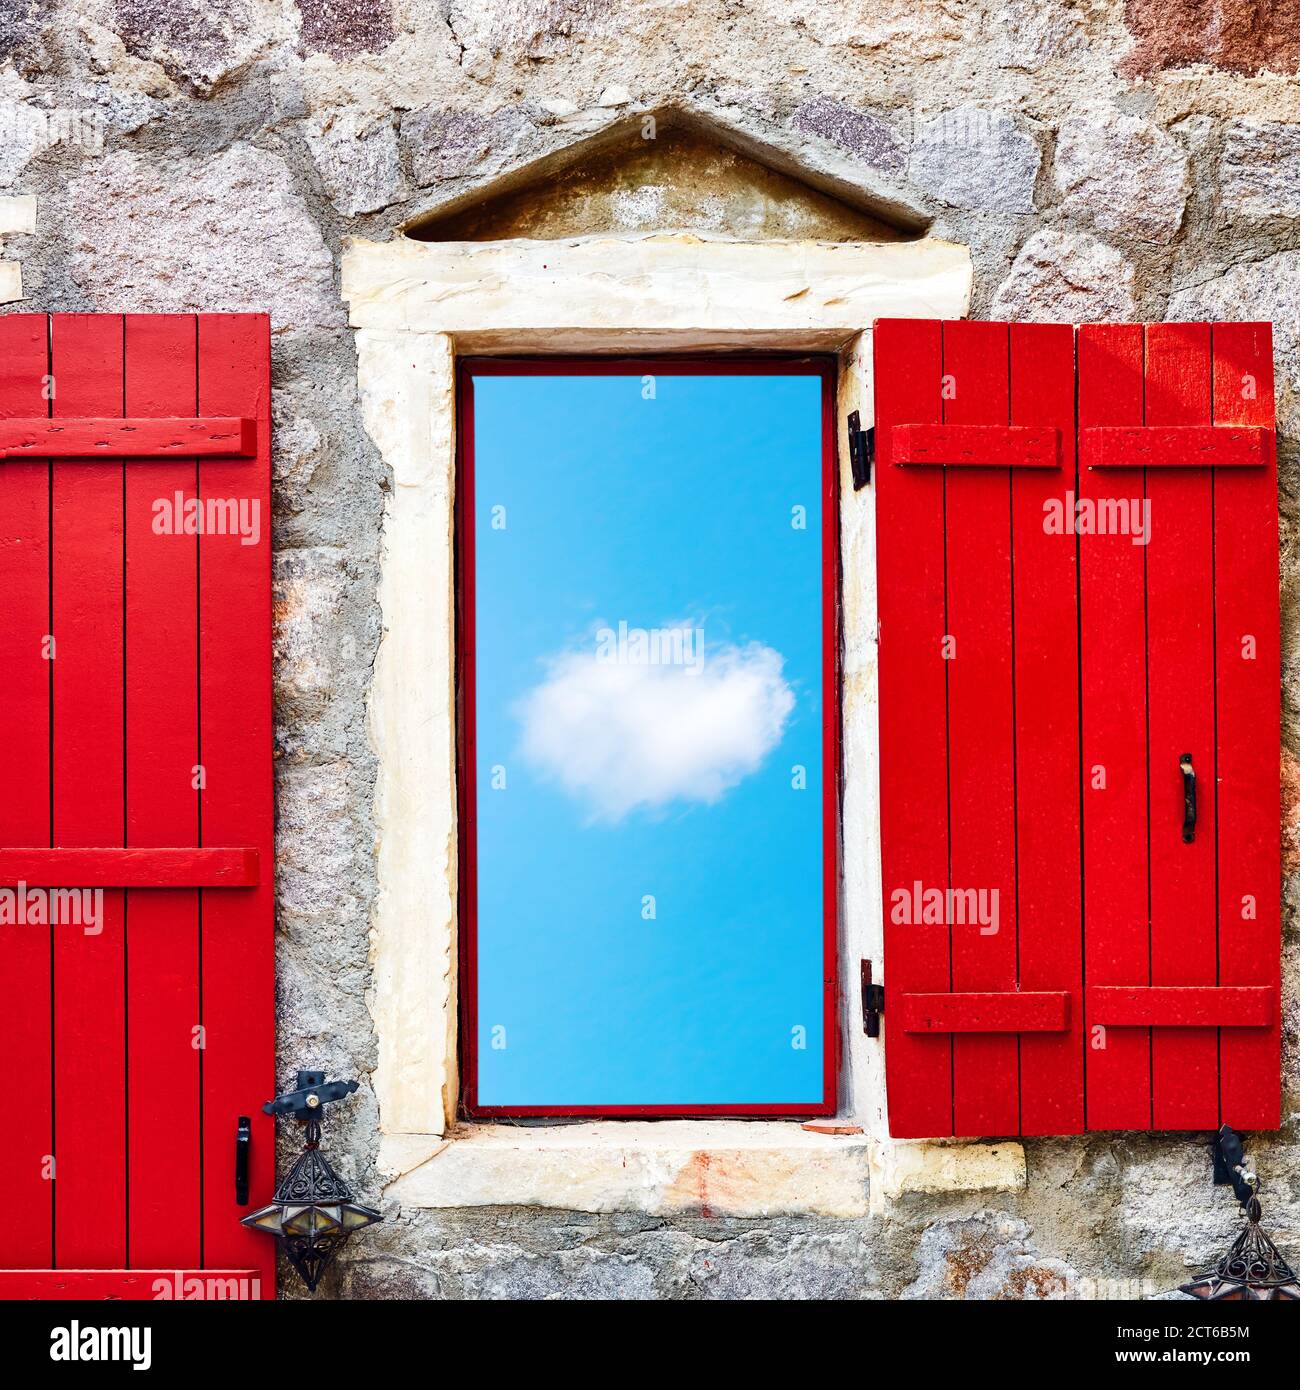 Window on a stone wall with blue sky and cloud view. Imagination, dreaming, freedom or inspiration concept. Stock Photo